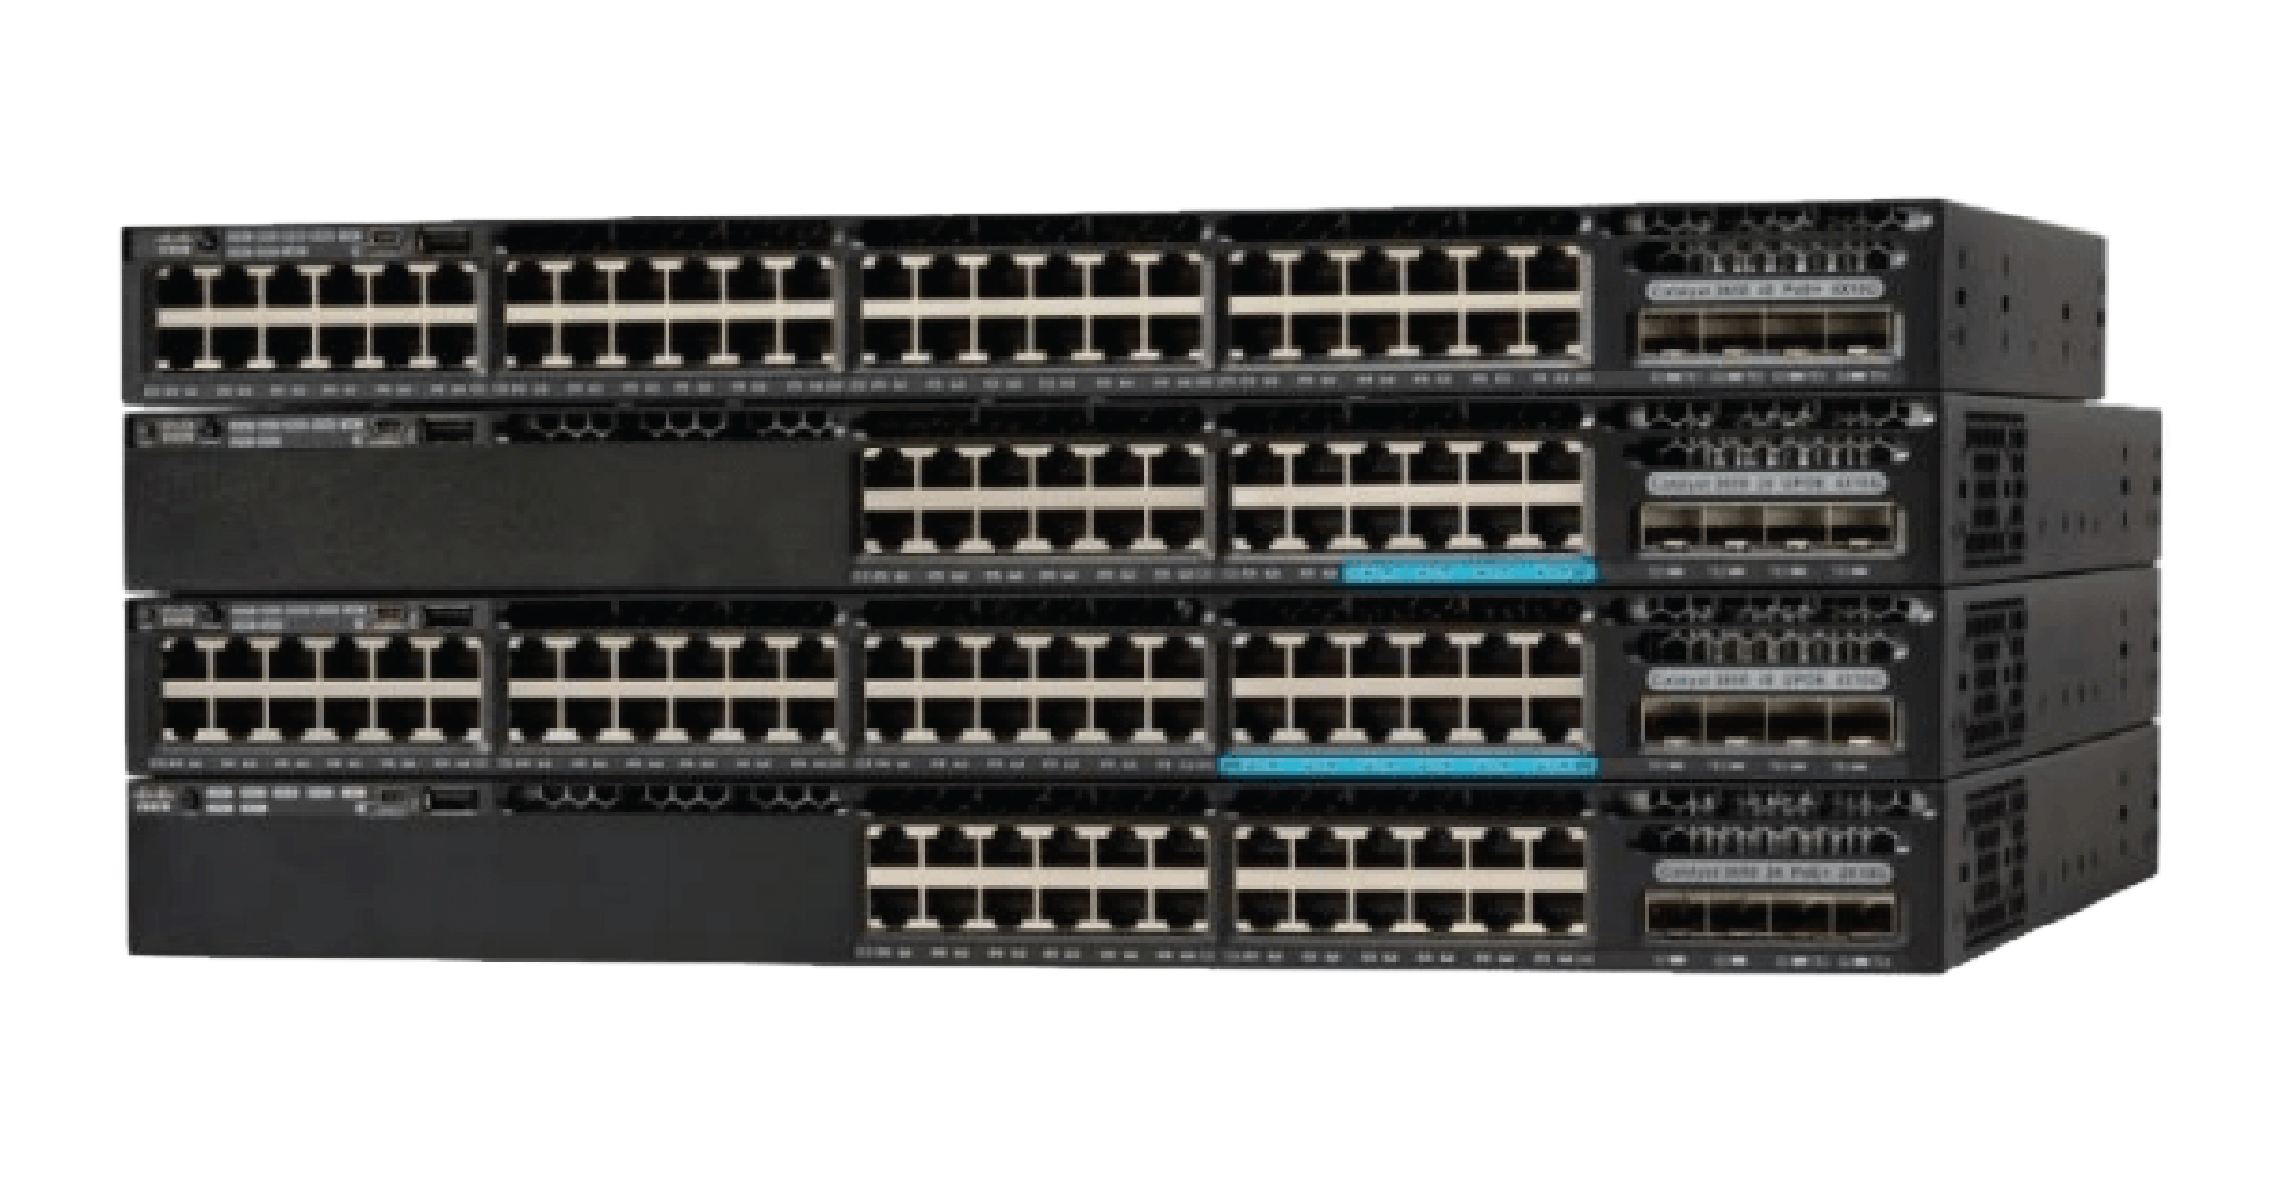 Catalyst 3650 Series Switches